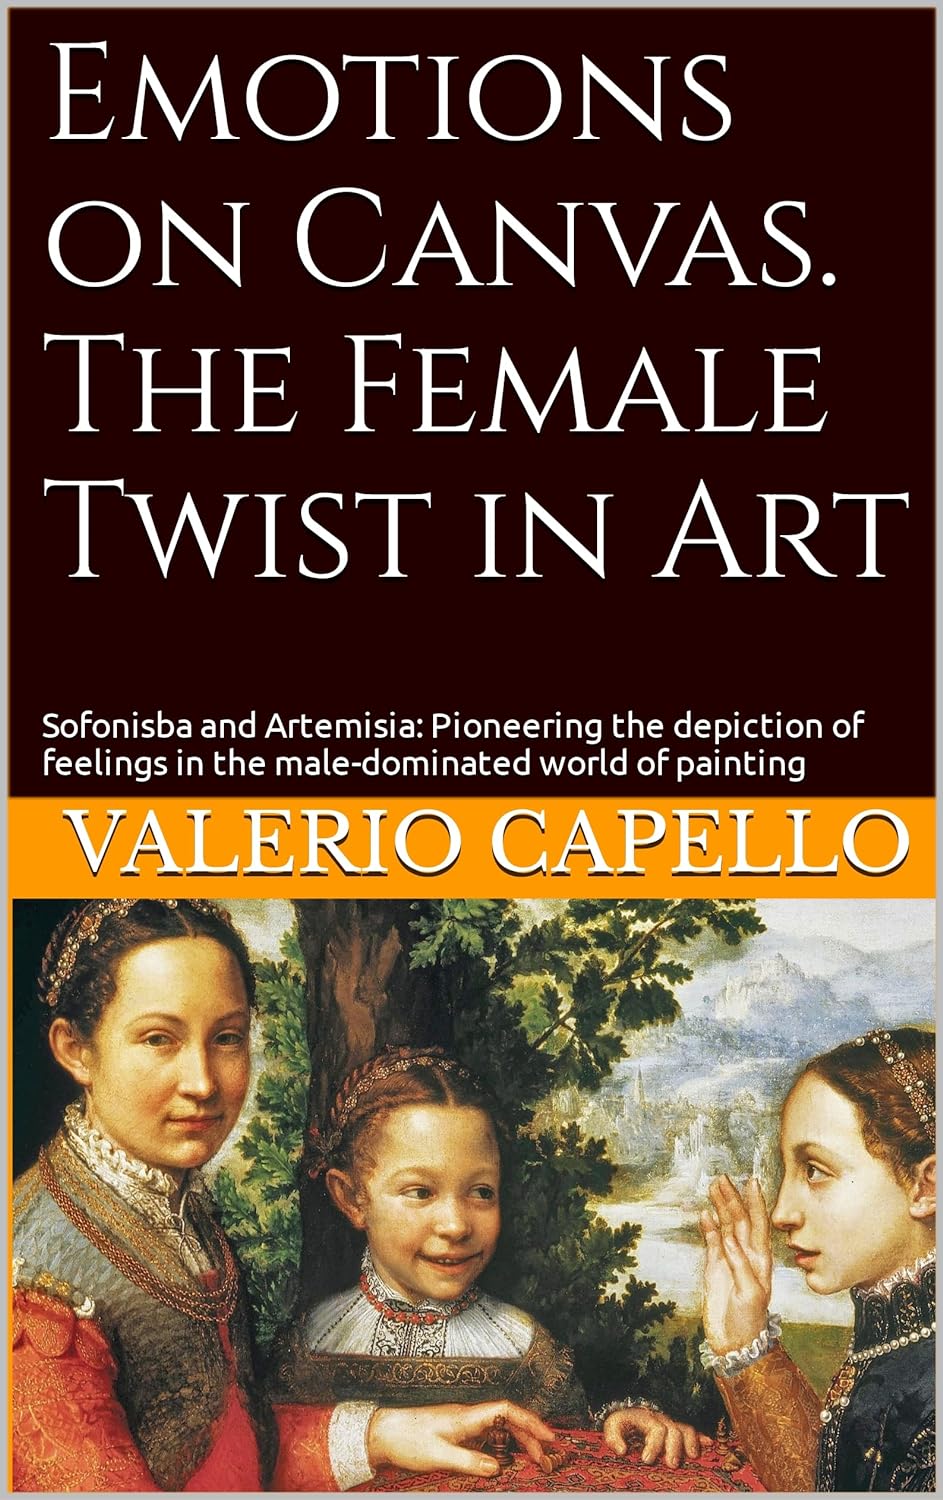 Emotions on Canvas. The Female Twist in Art: Sofonisba and Artemisia: Pioneering the depiction of feelings in the male-dominated world of painting